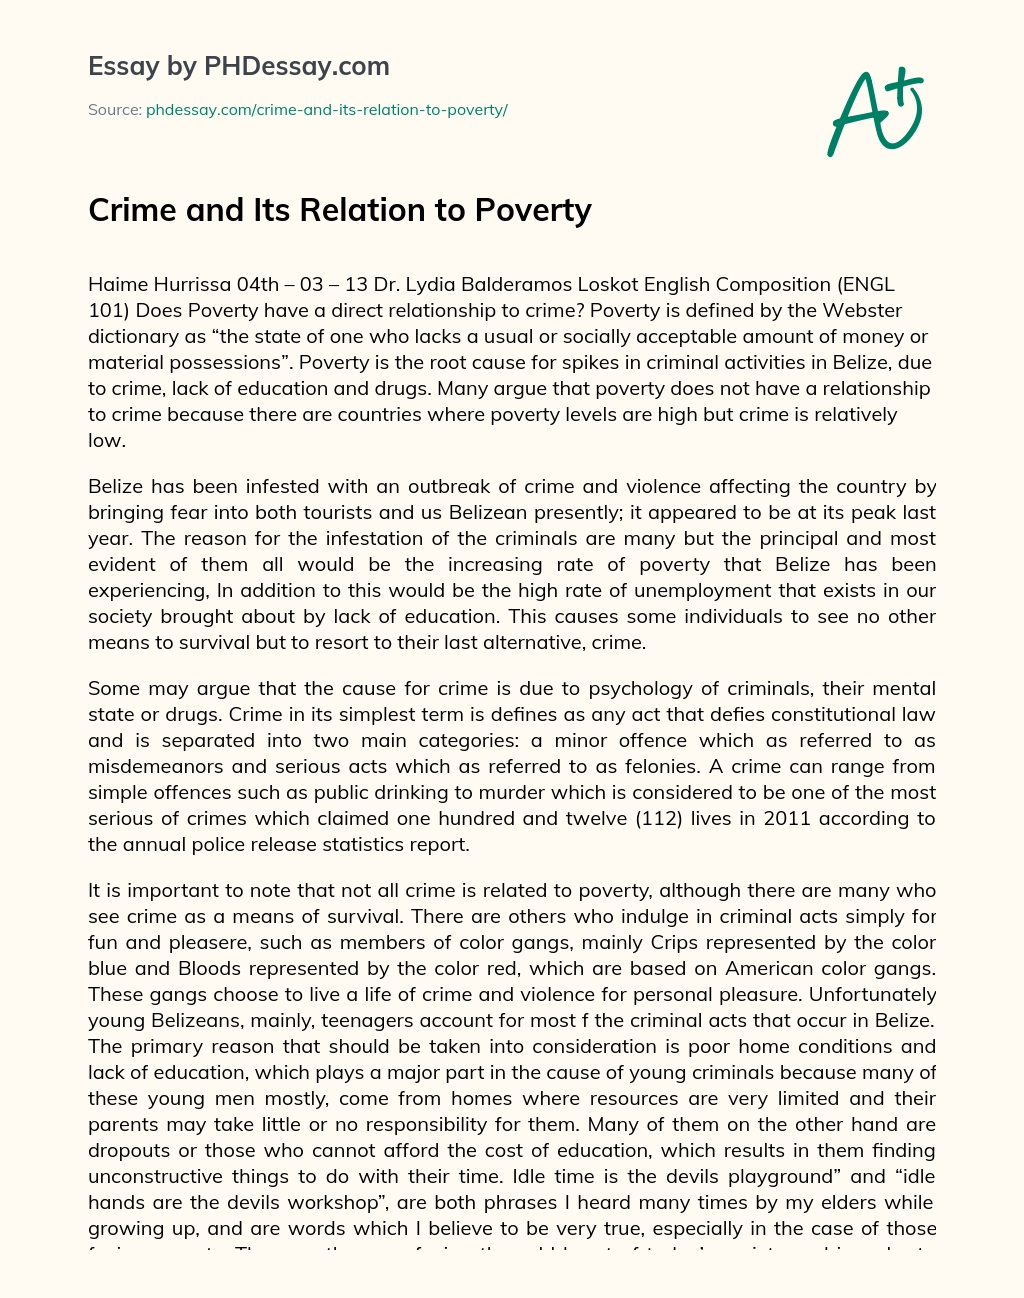 Crime and Its Relation to Poverty essay